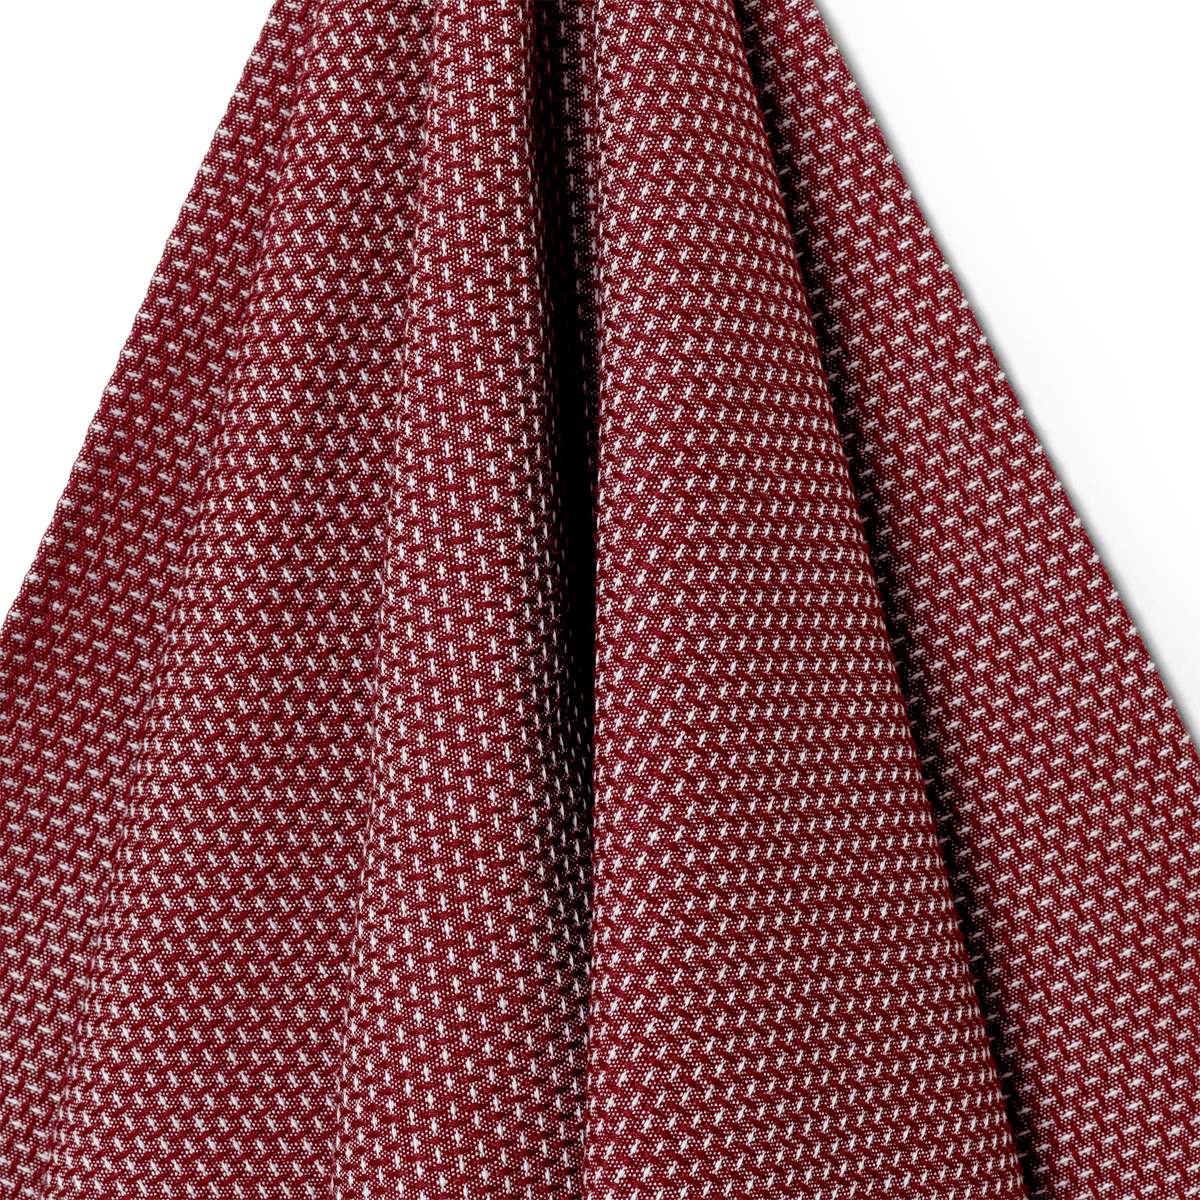 COLORED CHECK KITCHEN TOWELS (PACK OF 2) - Burgundy